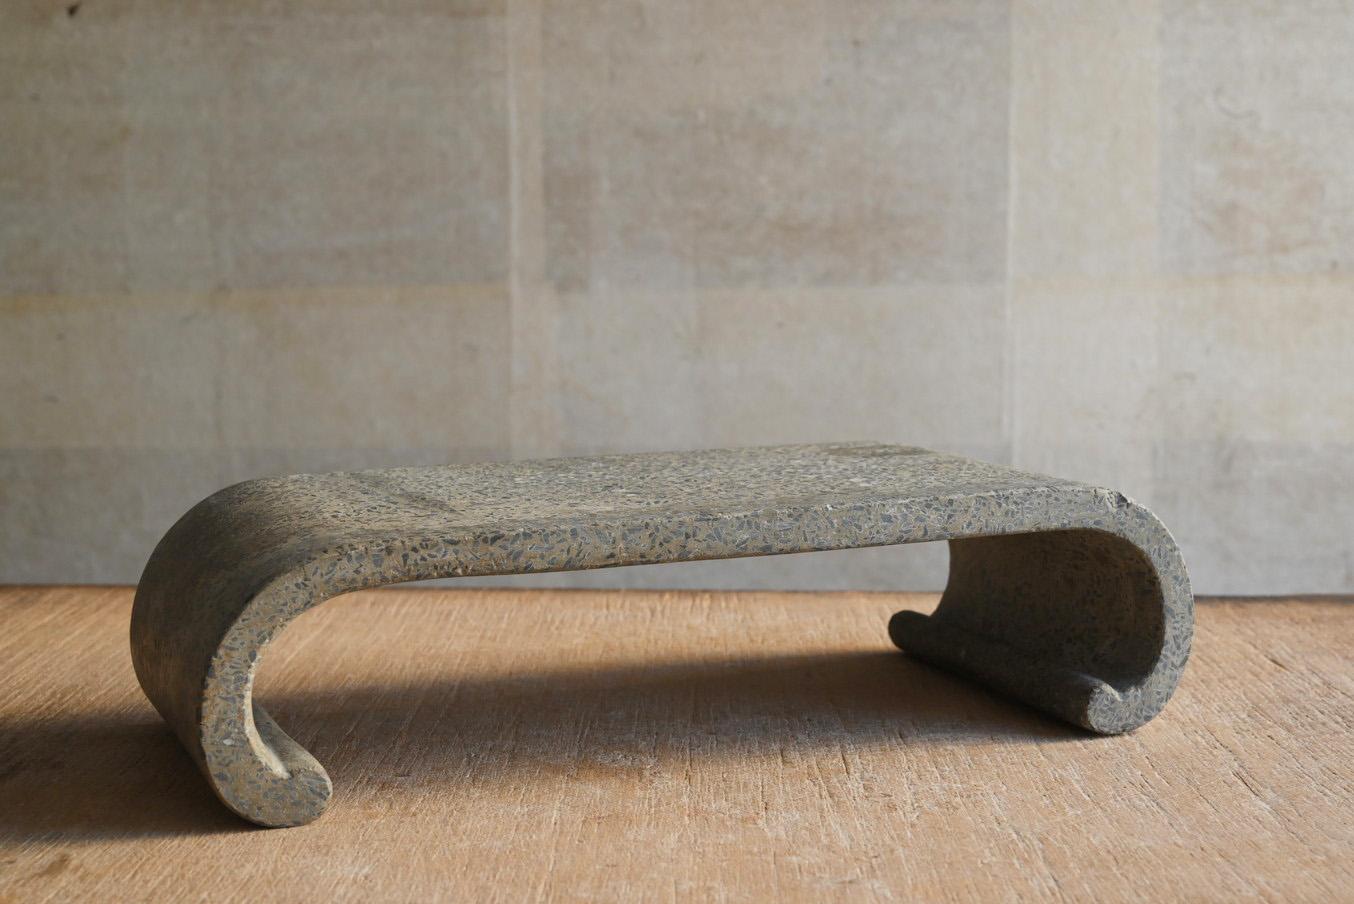 This is a small stand made of old Japanese concrete.
This shape is called 